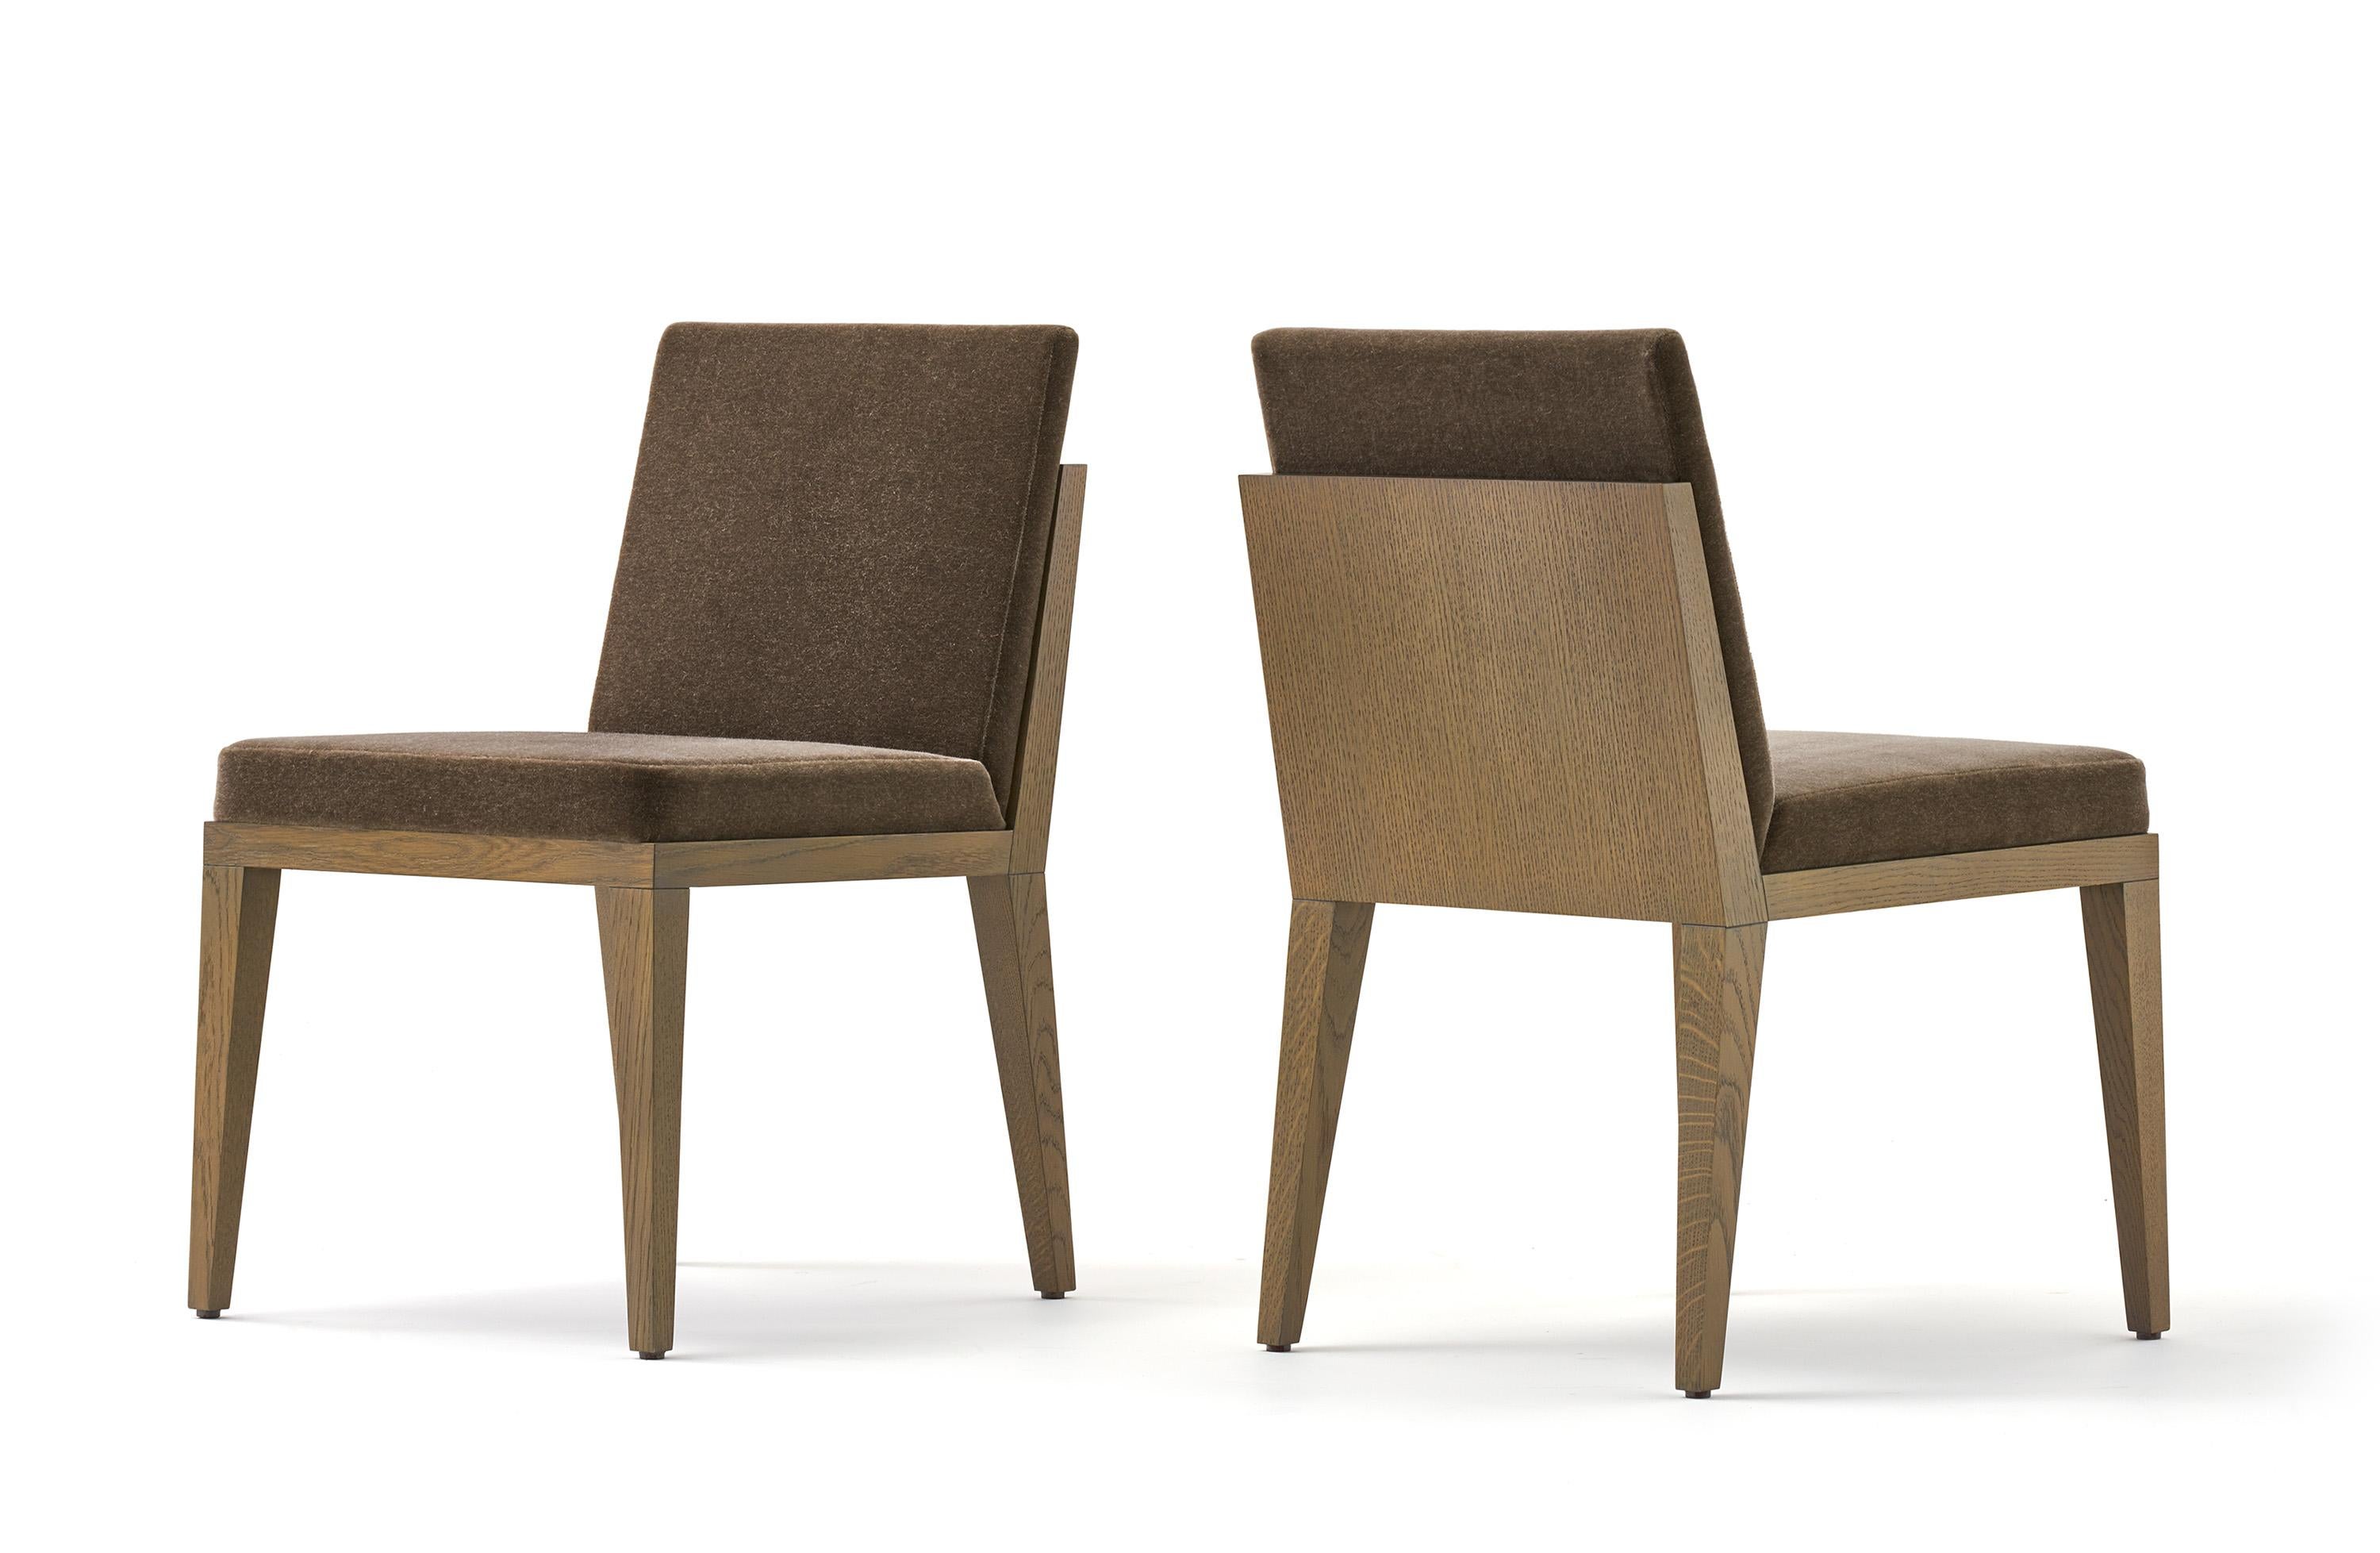 Item No: CH-001

Inspired by the craftsmanship and detail of the George Nelson Montauk House, the Structured Lacquer Chair and the Structured Dining Chair are available in a mix of leathers, hides, and furs for the seat cushion and seat back